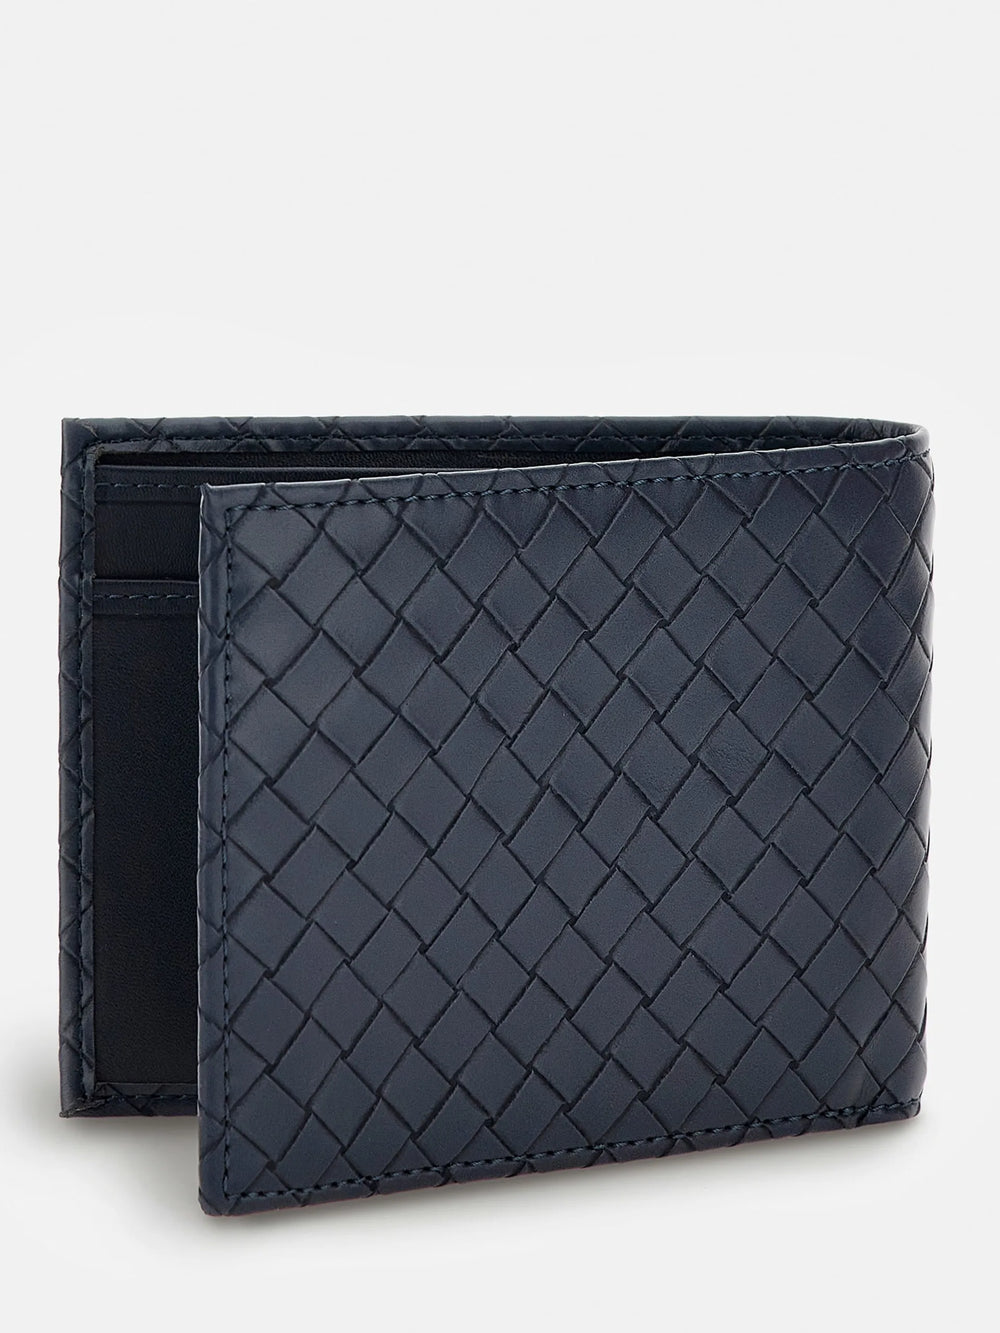 CALABRIA BILLFOLD WITH COIN POCKET - Guess